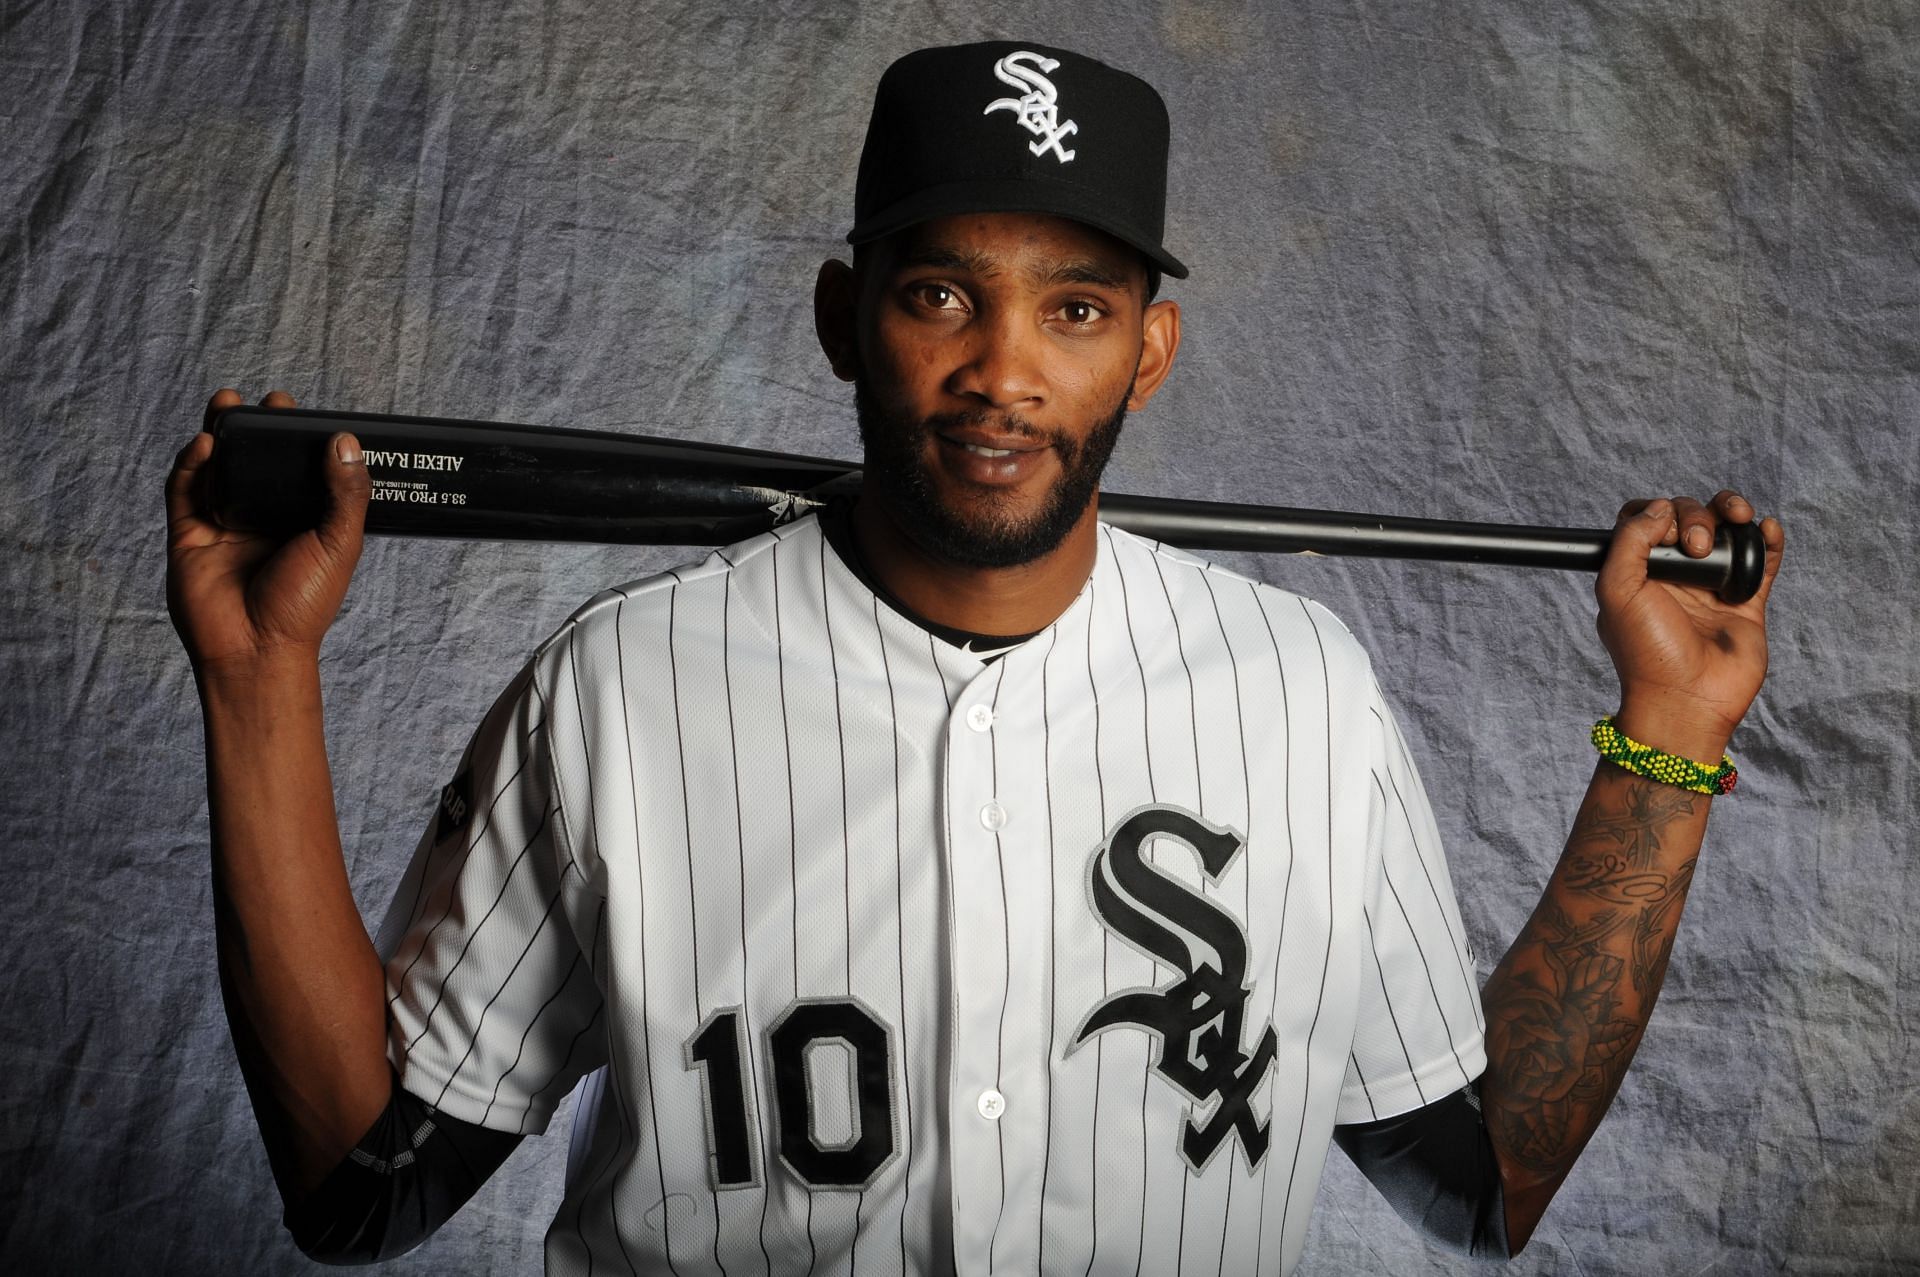 Alexei Ramirez played for the White Sox and the Rays